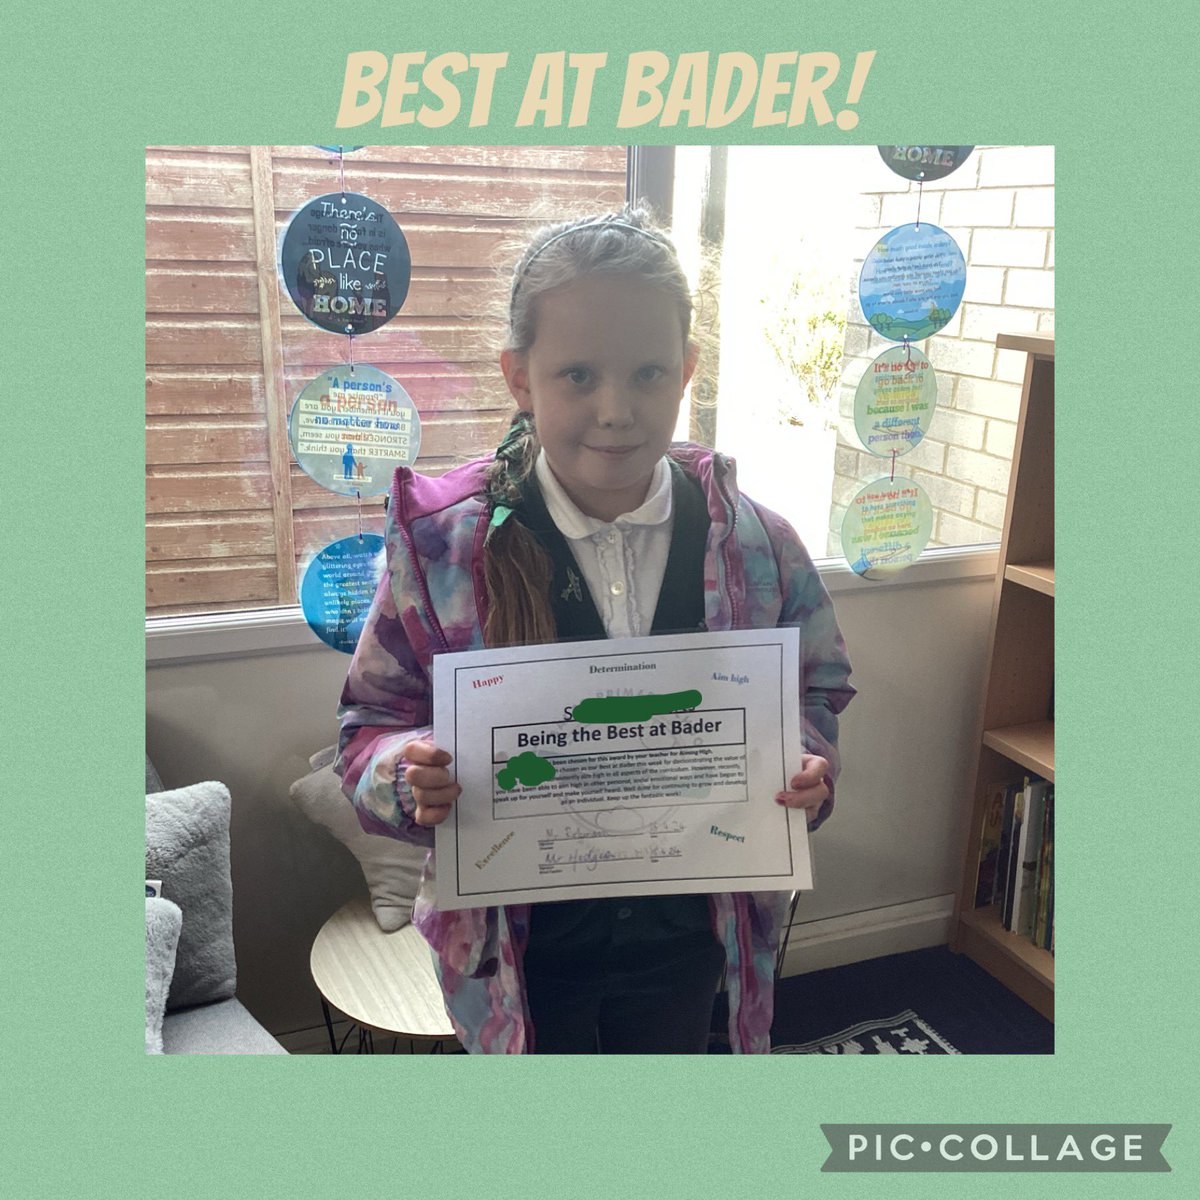 Y5R is celebrating their superb Best at Bader who was awarded their certificate this week for demonstrating the value of #AimingHigh #BaderValues #RRS #Article28